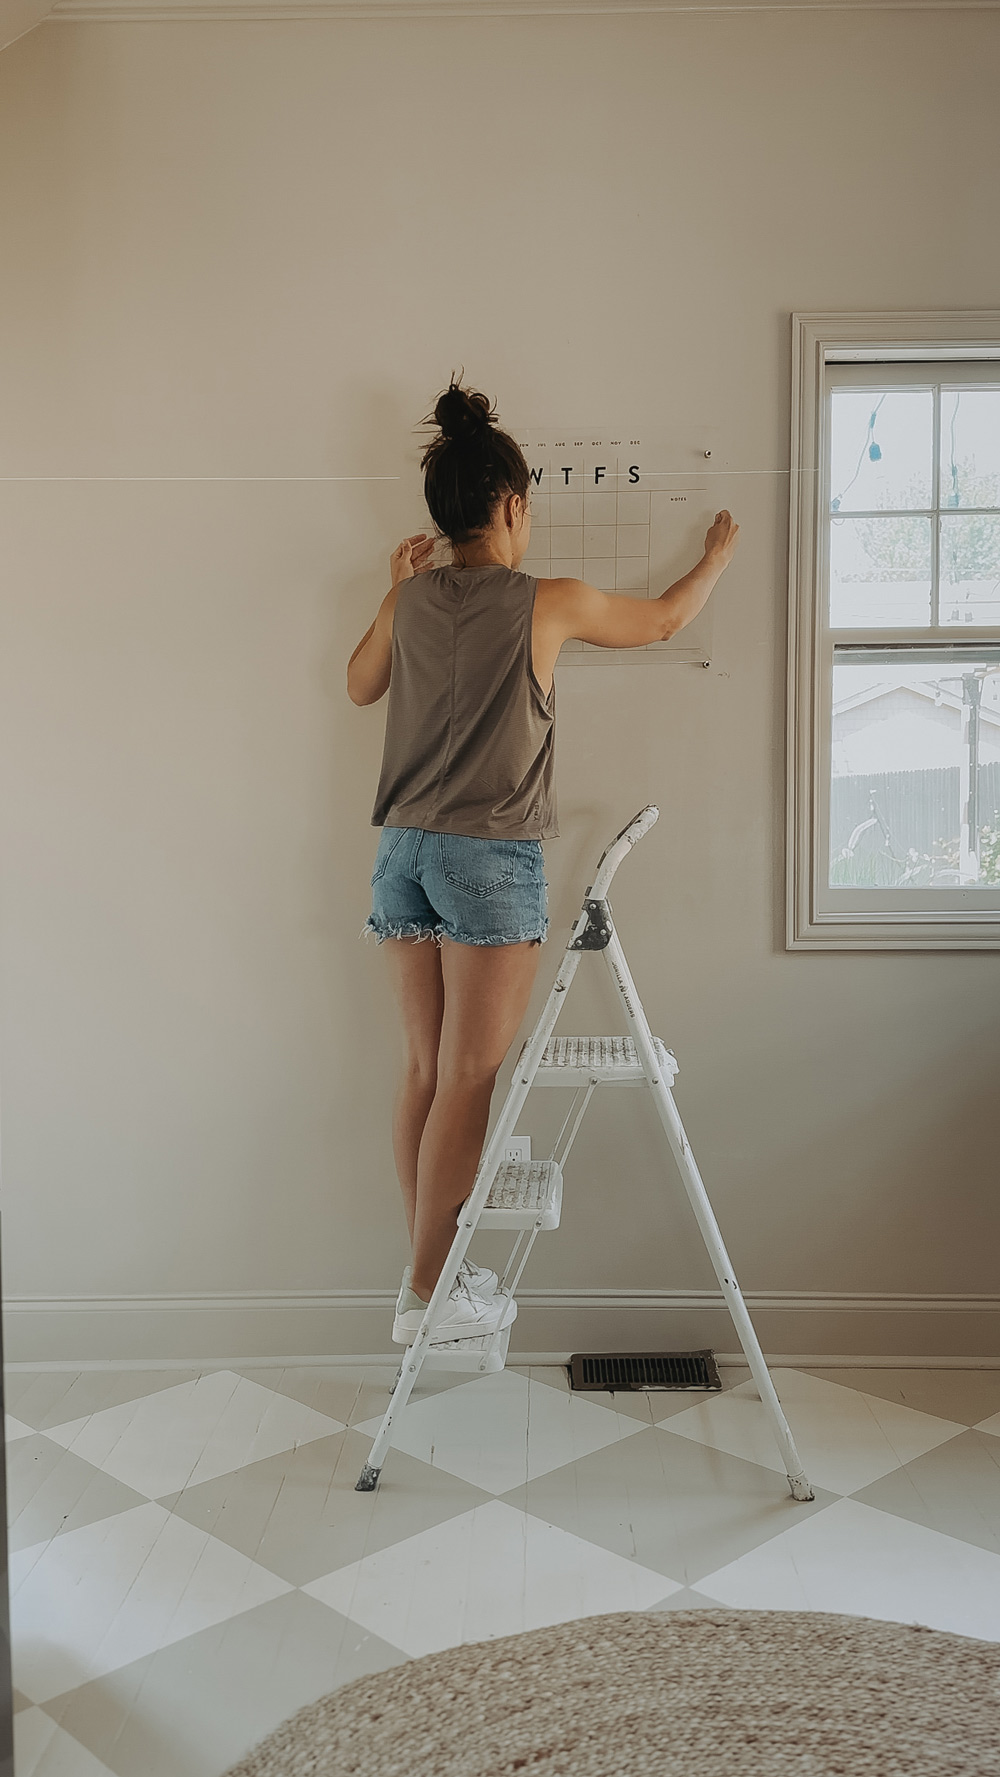 A person using a step stool to hang up a calendar.